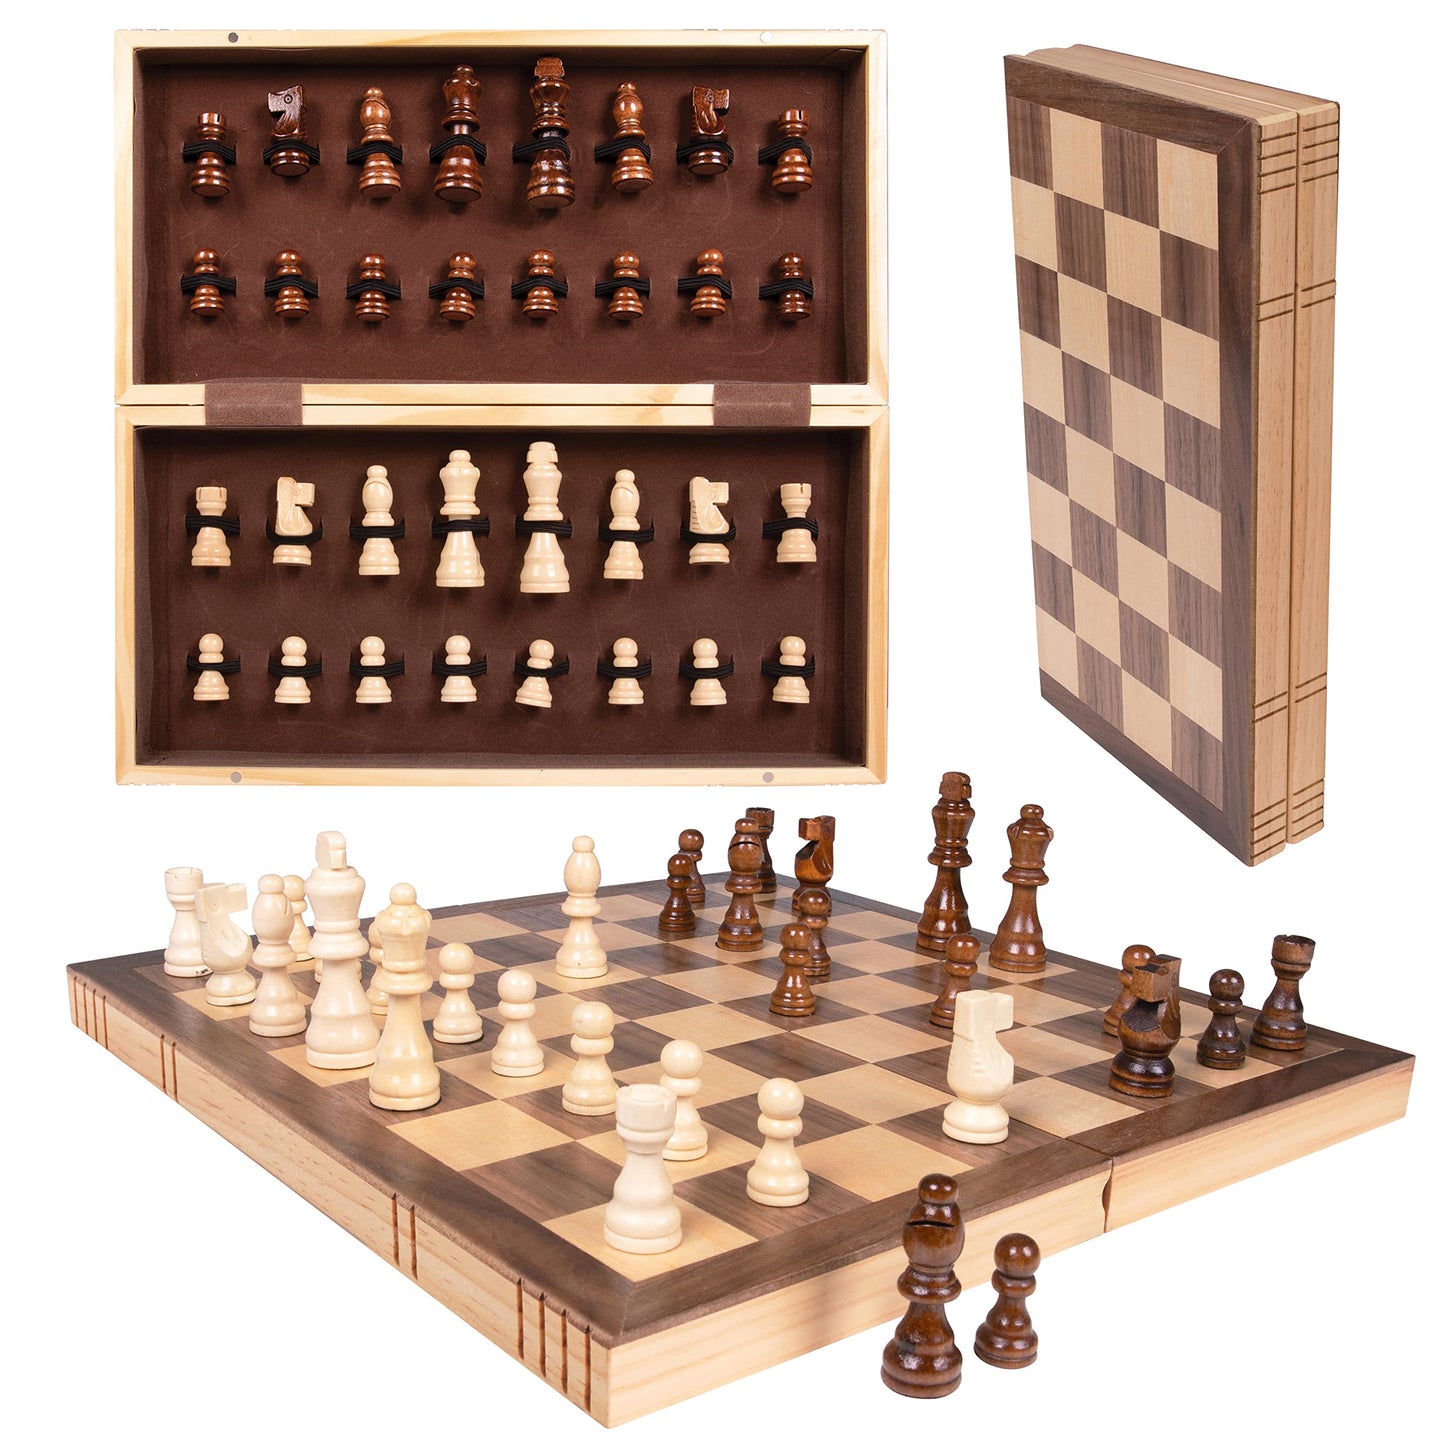 Premium Chess Set - Wooden Board Game with a Portable Wood Case and Secure Storage for Pieces, Set for Kids and Adults 11.5 inches